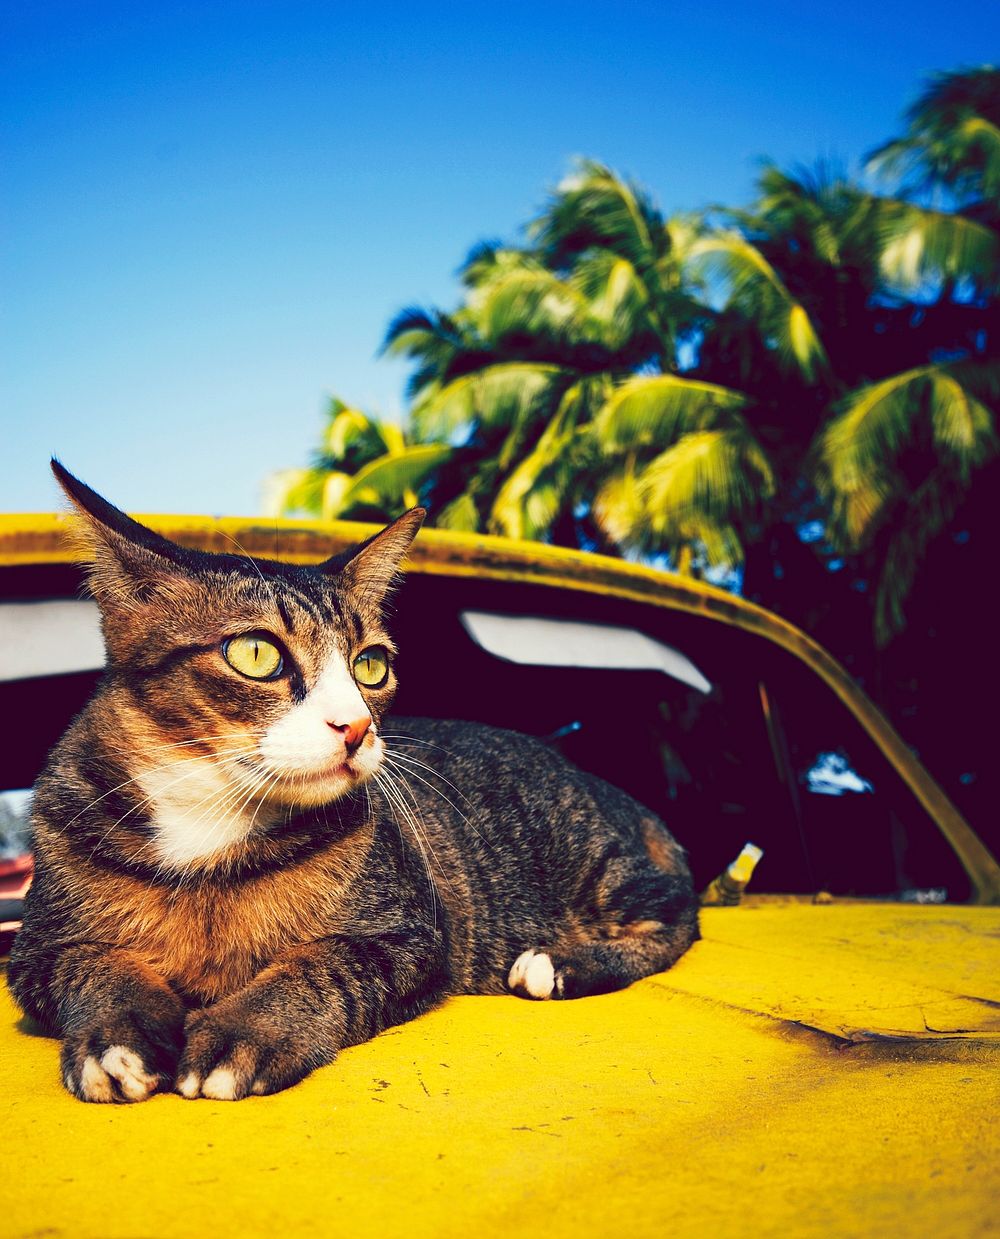 Cat relaxing on an old classic car